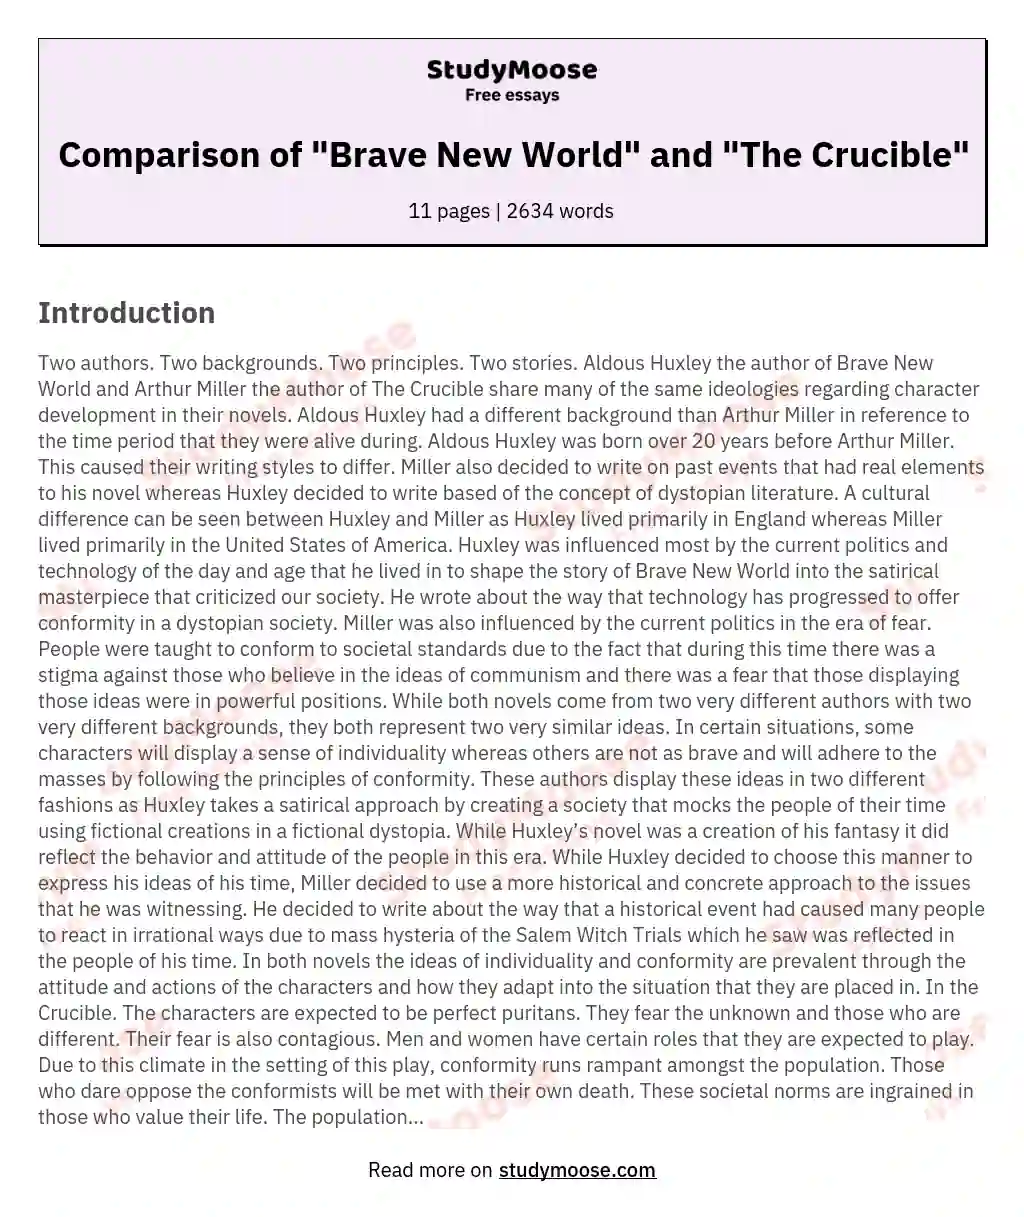 Comparison of "Brave New World" and "The Crucible"